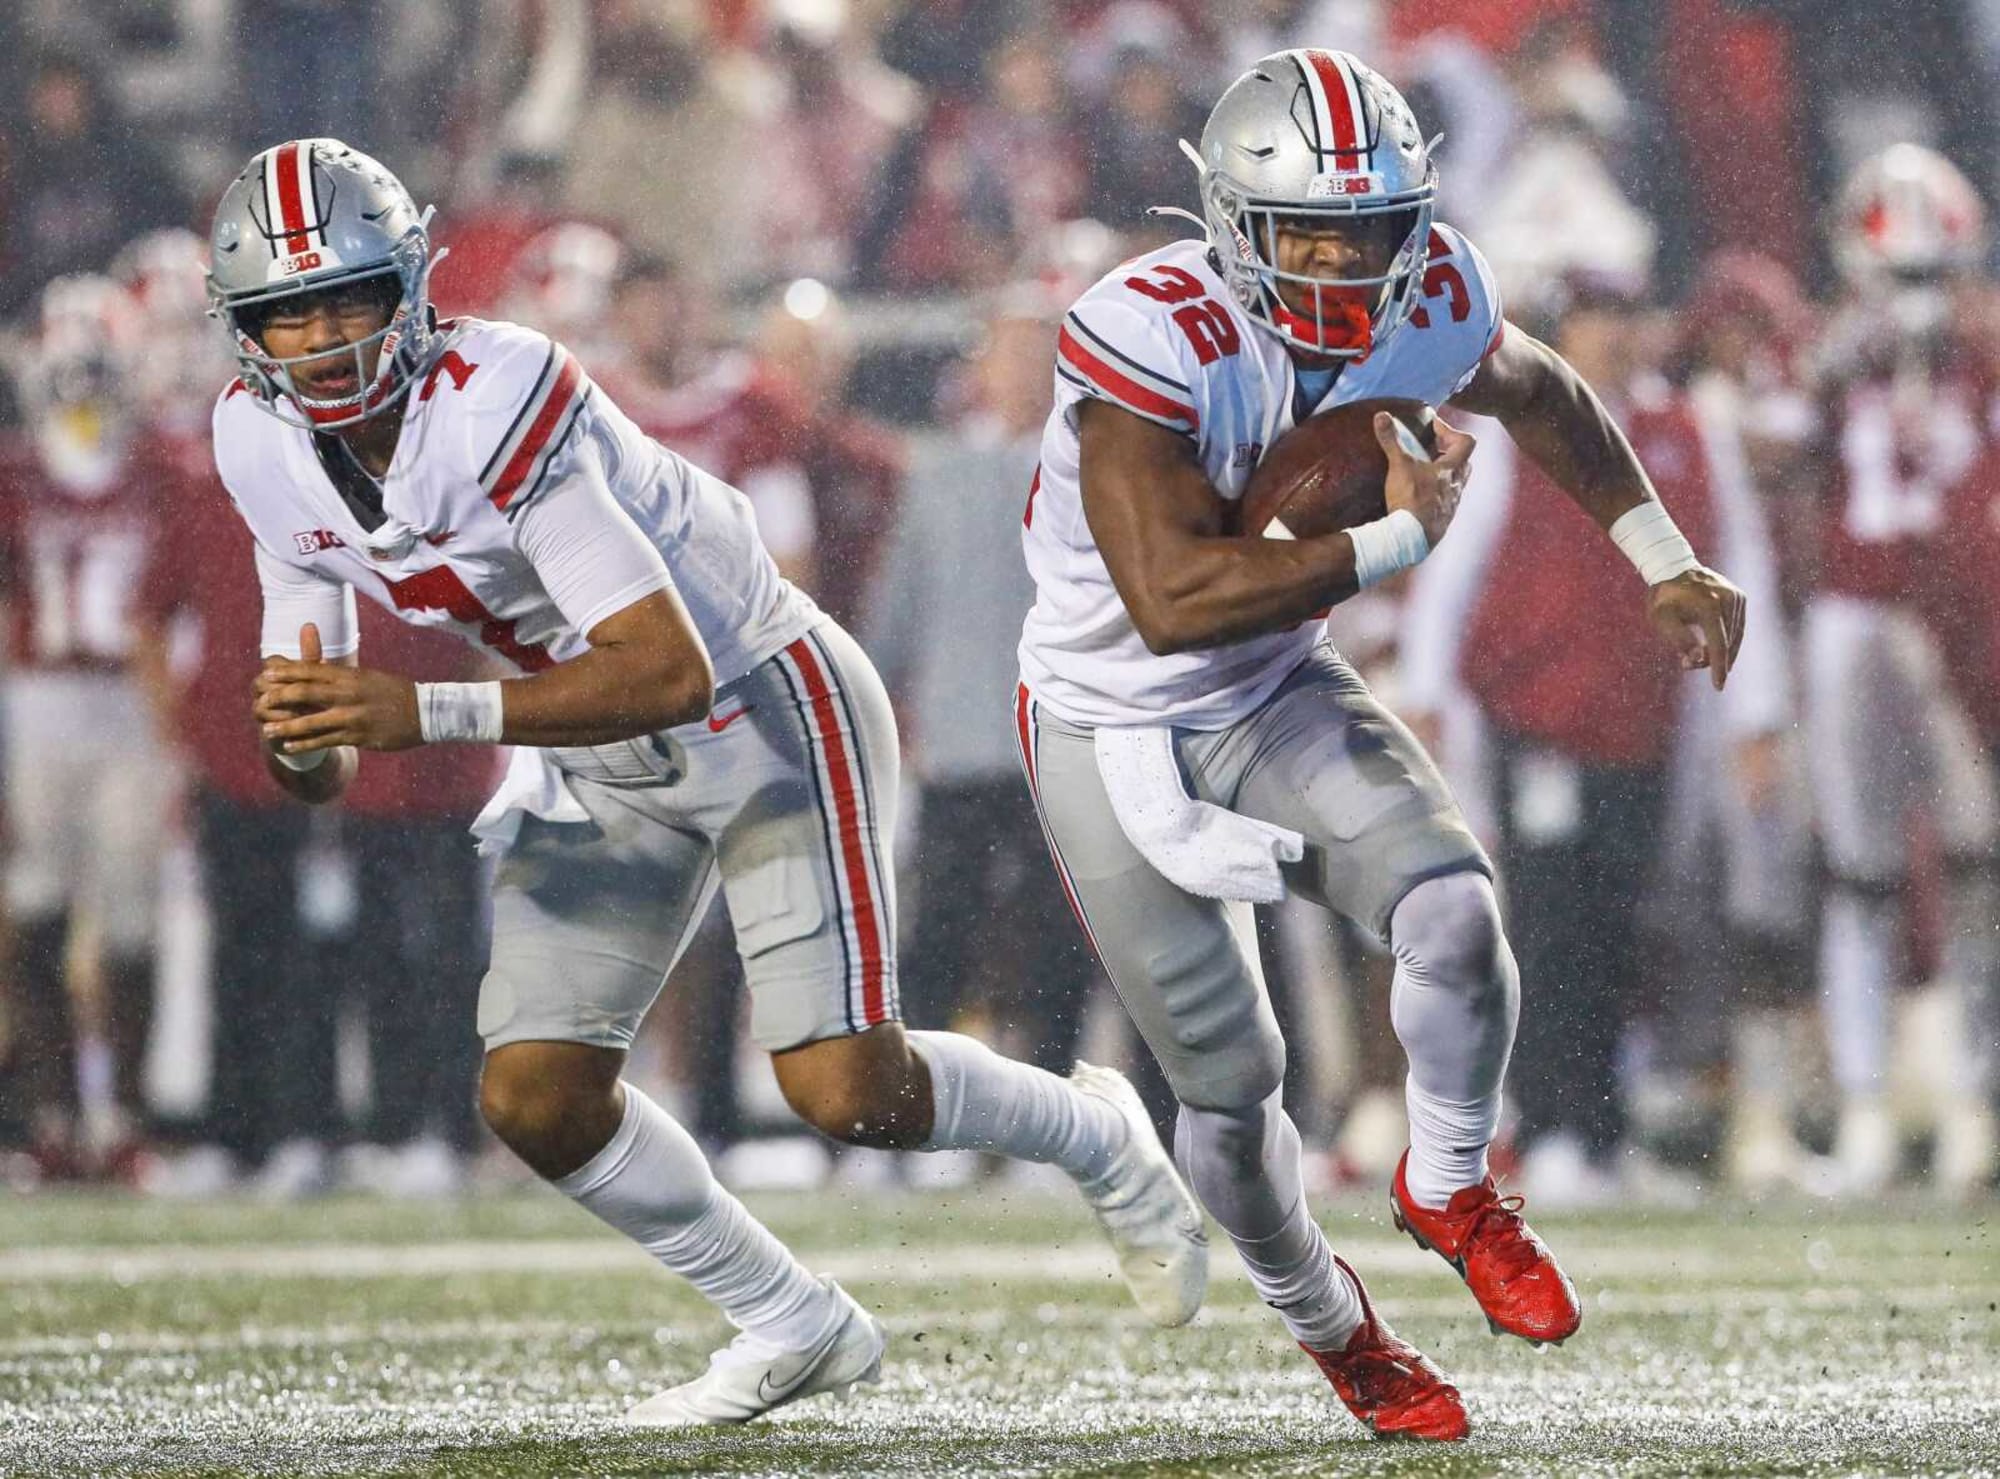 Ohio State Football game today: Ohio State vs. Penn State injury report,  spread, over/under, schedule, live stream, TV channel